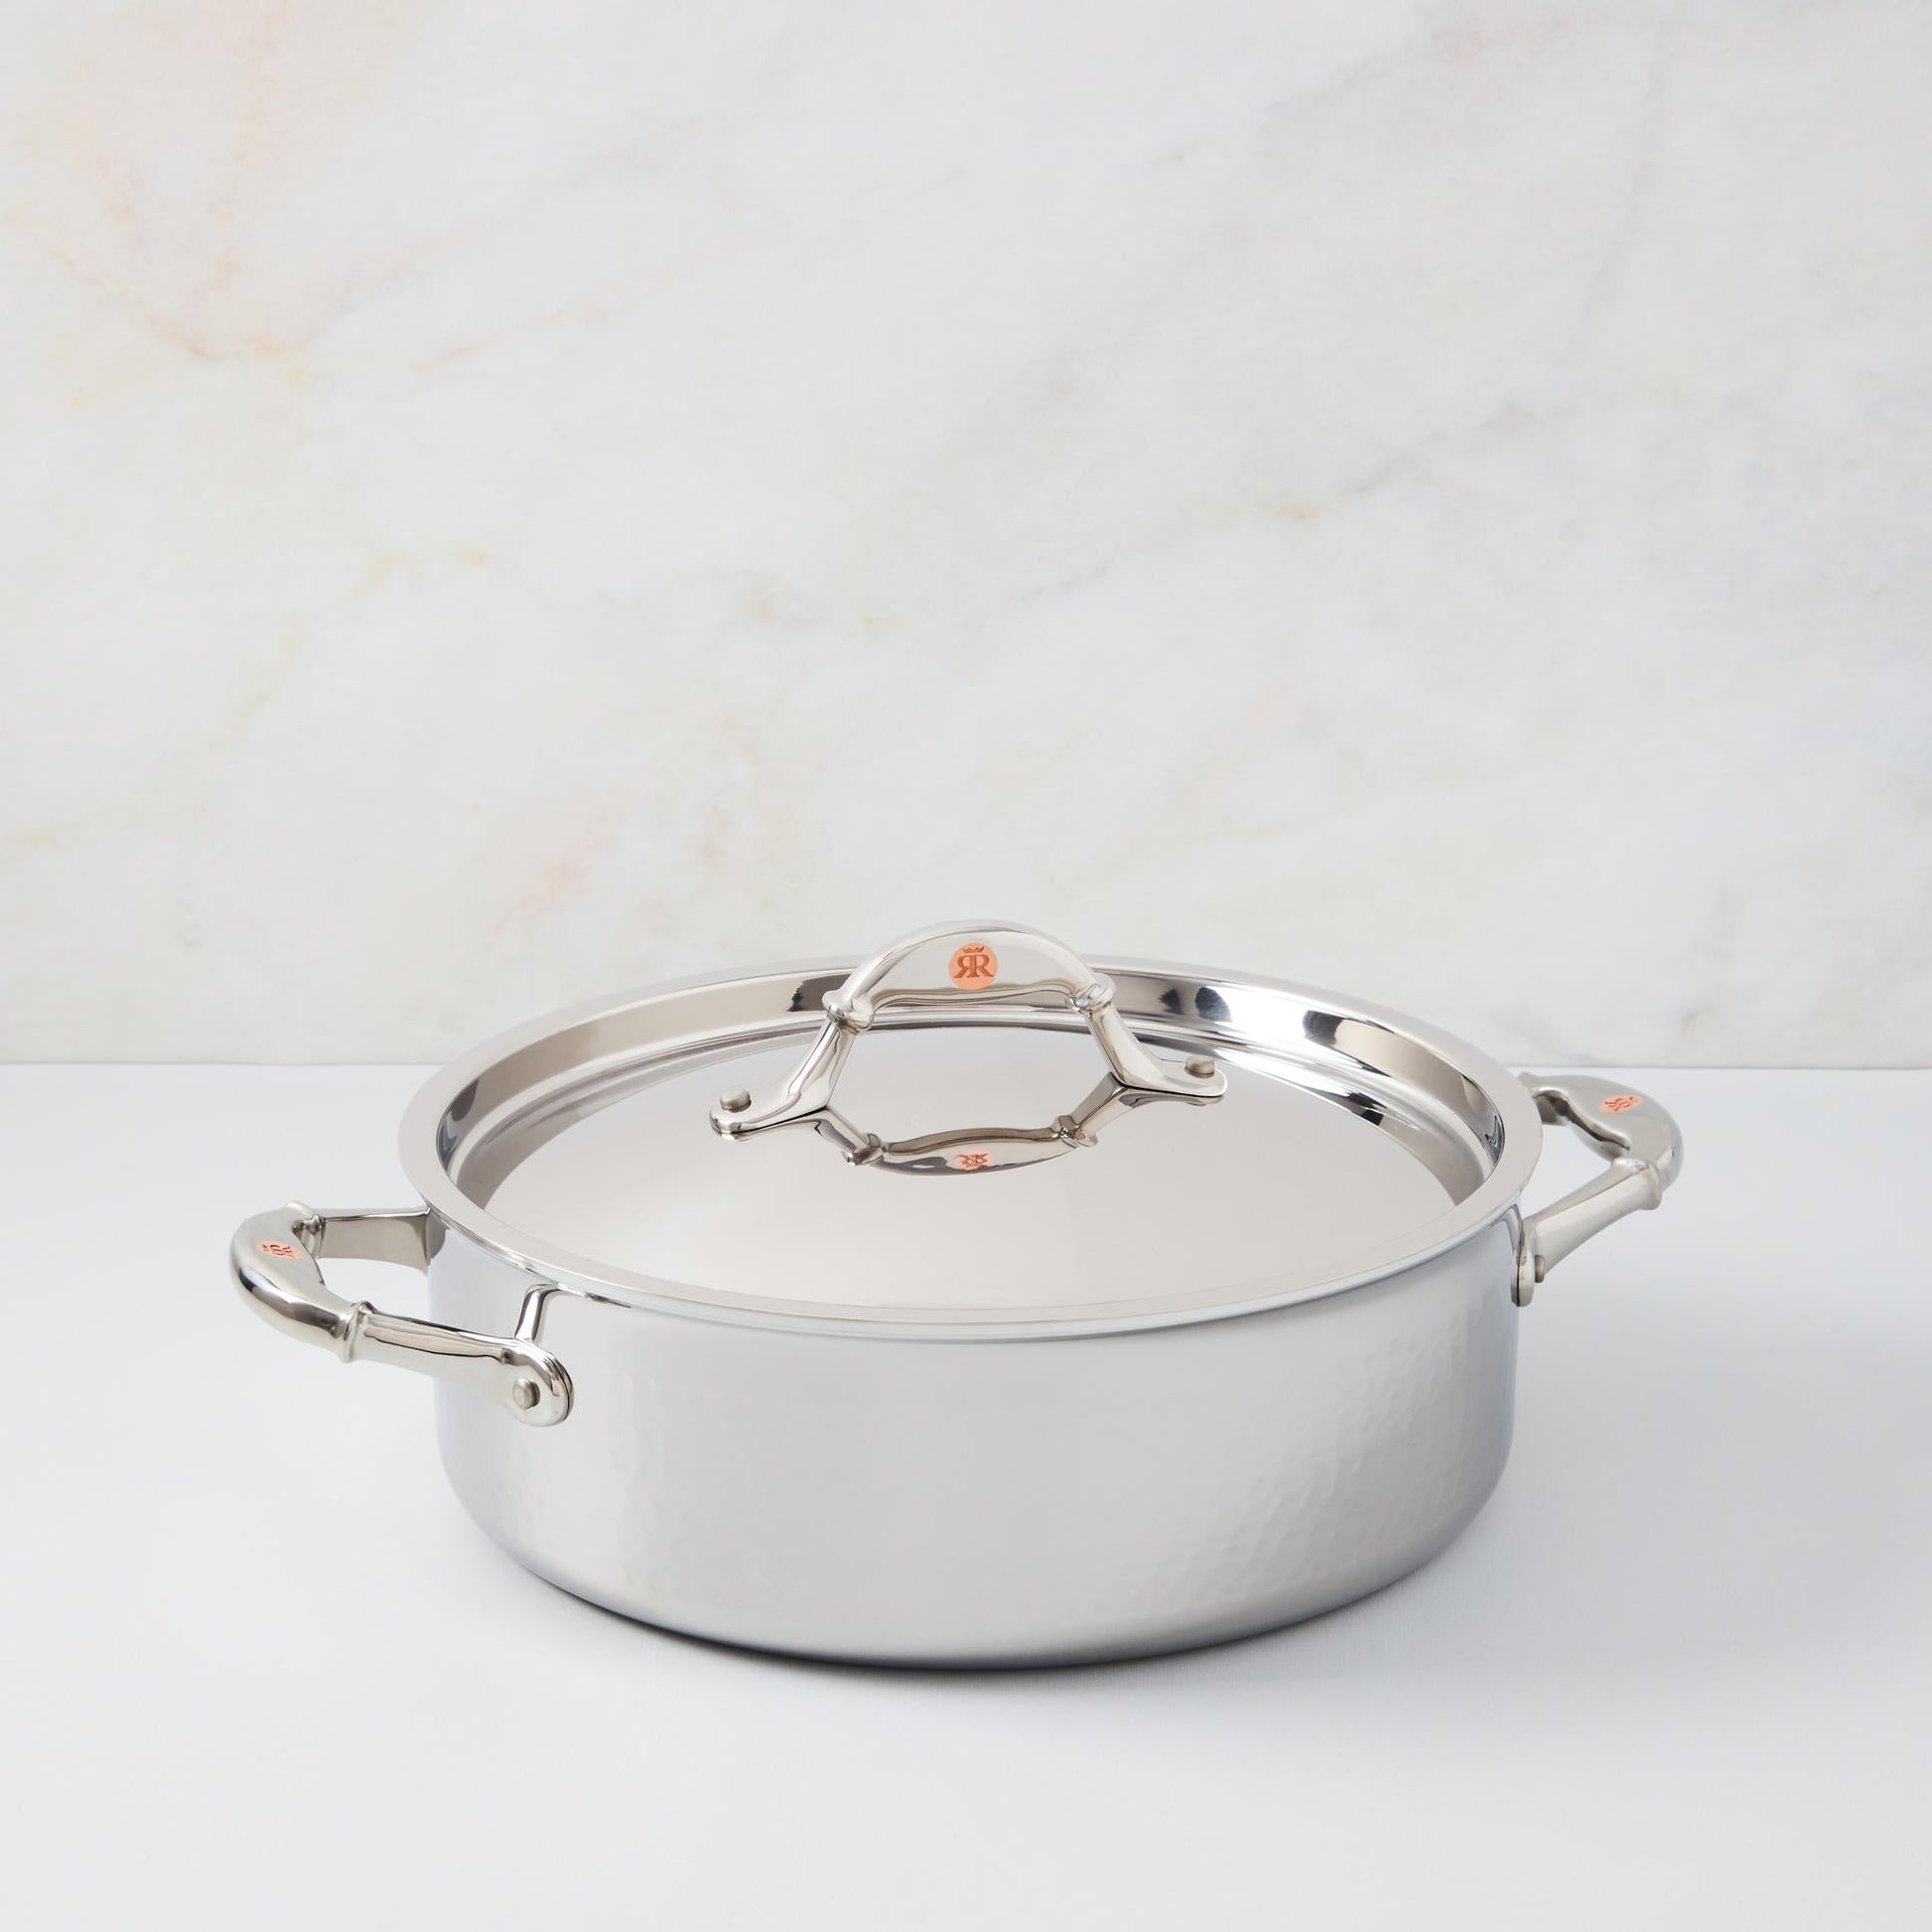  Hammered clad stainless steel braiser with lid from Ruffoni